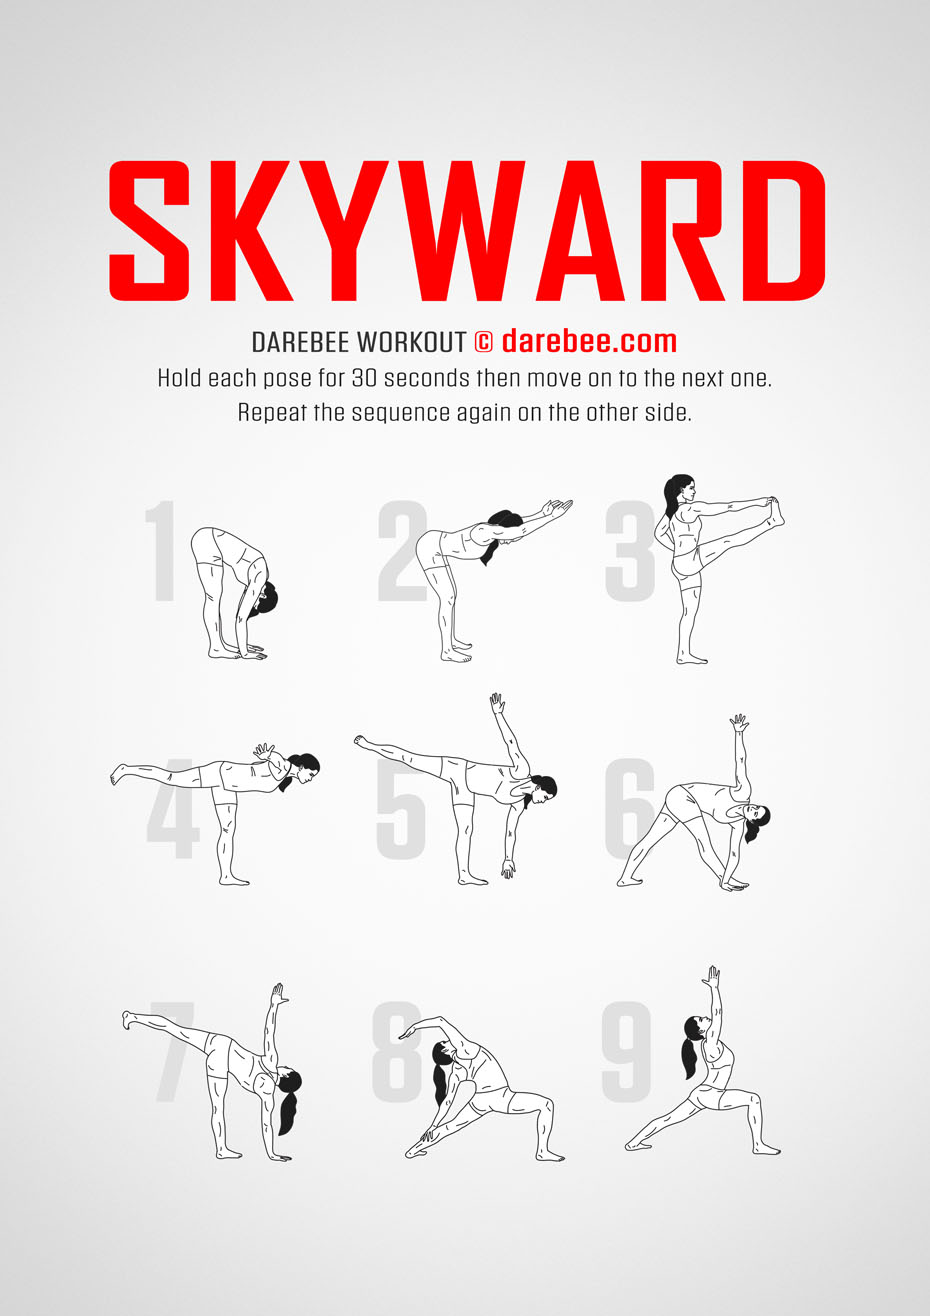 Skyward is a ypga-based, Darebee home-fitness total body strength and flexibility workout. 